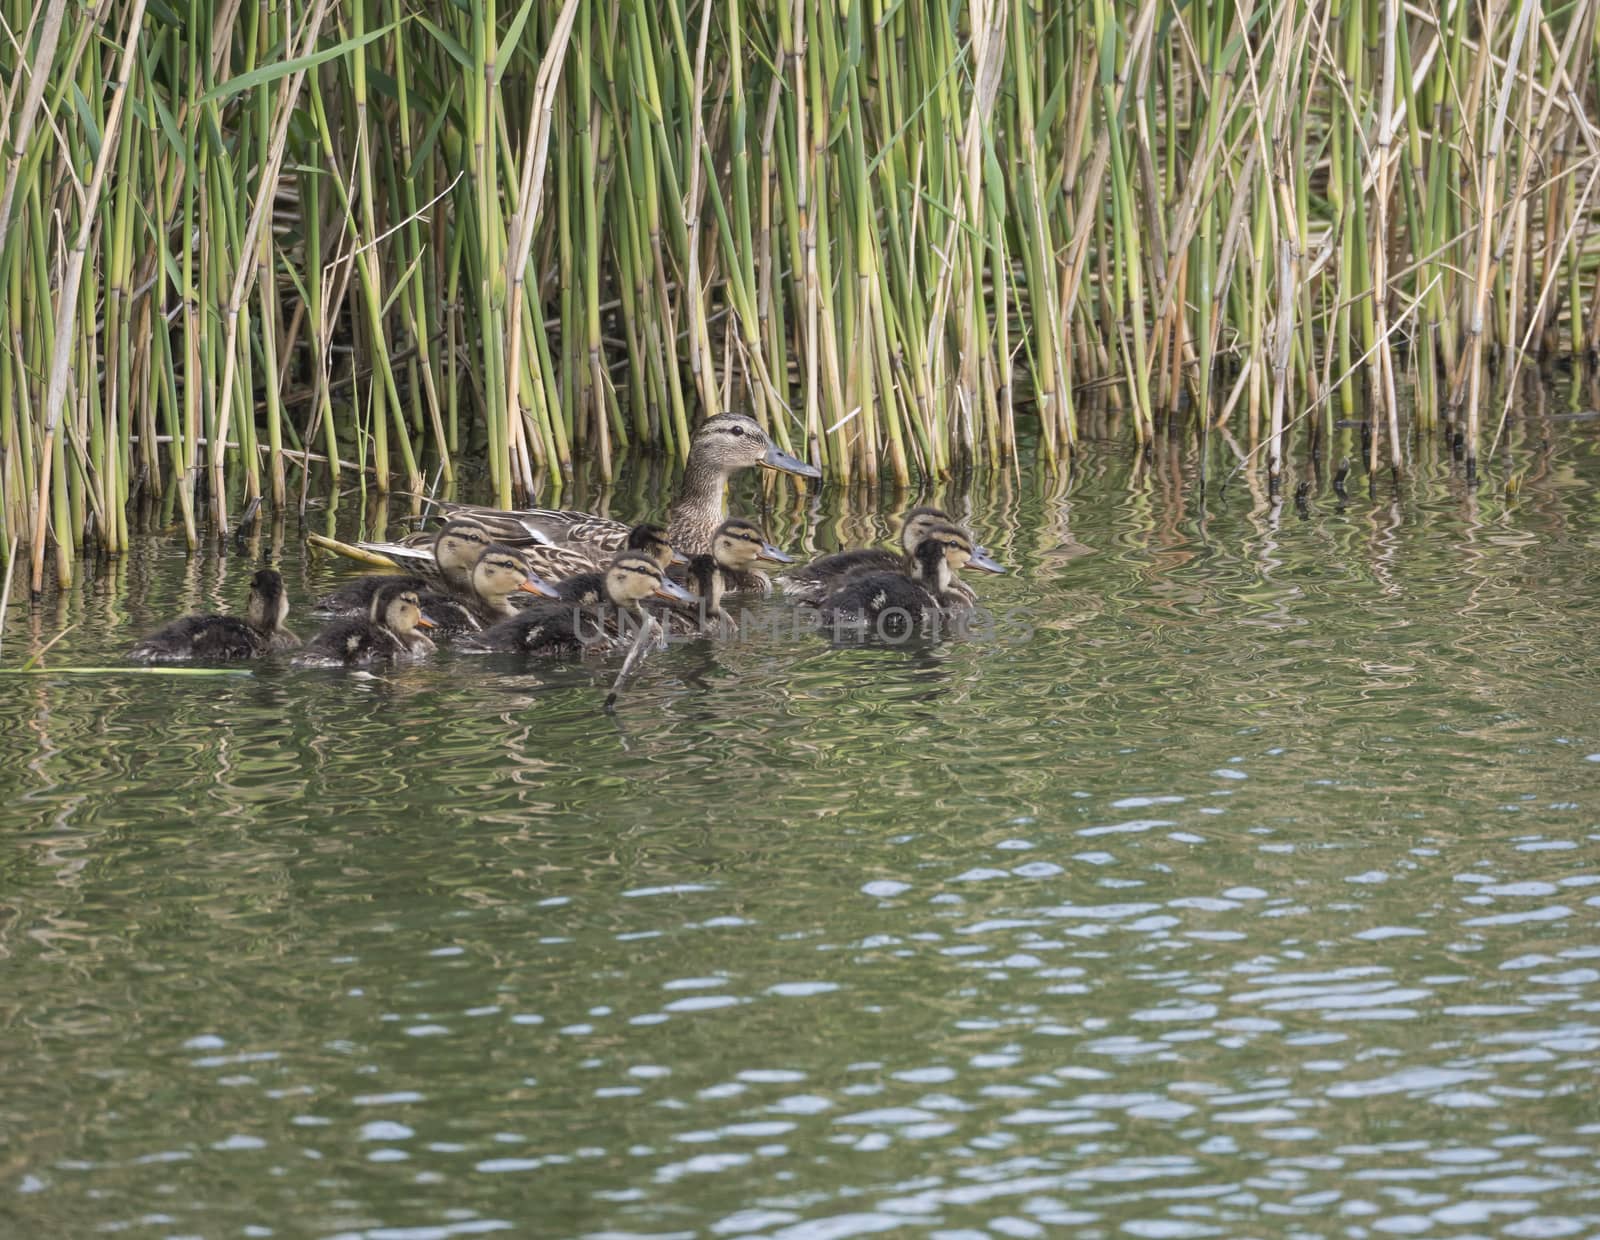 Wild Female Mallard duck with youngs ducklings. Anas platyrhynchos in the water. Beauty in nature. Spring time. Birds swimming on lake with reeds. Young ones